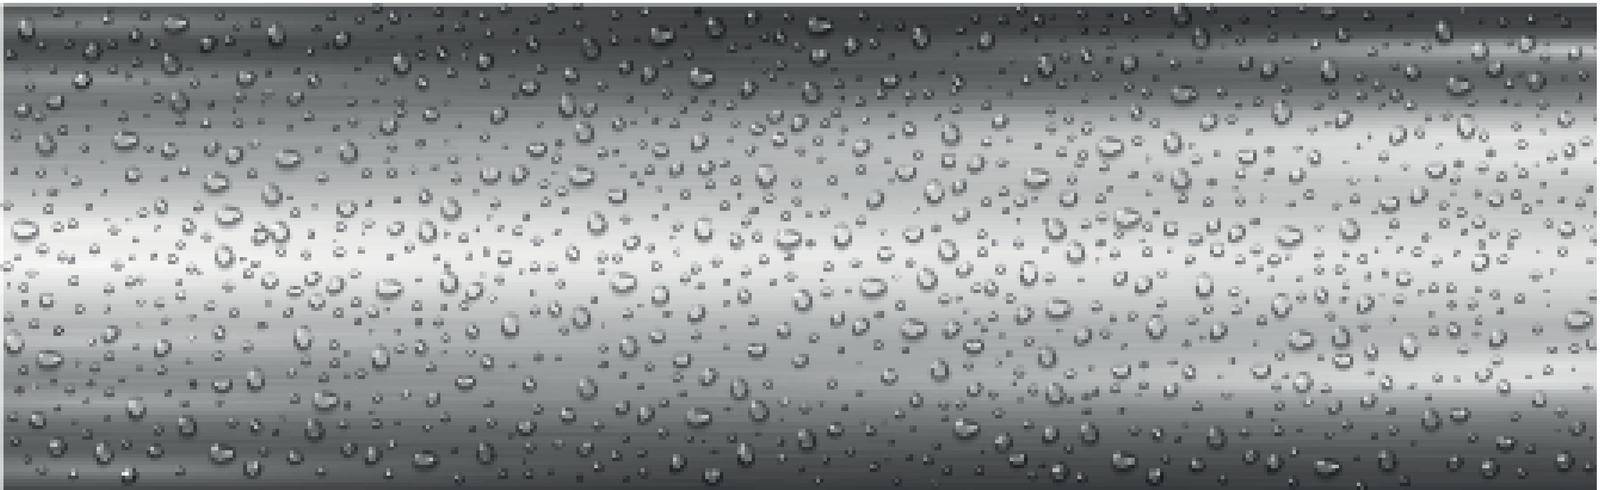 Realistic drops of water on a silver metal background - Vector illustration